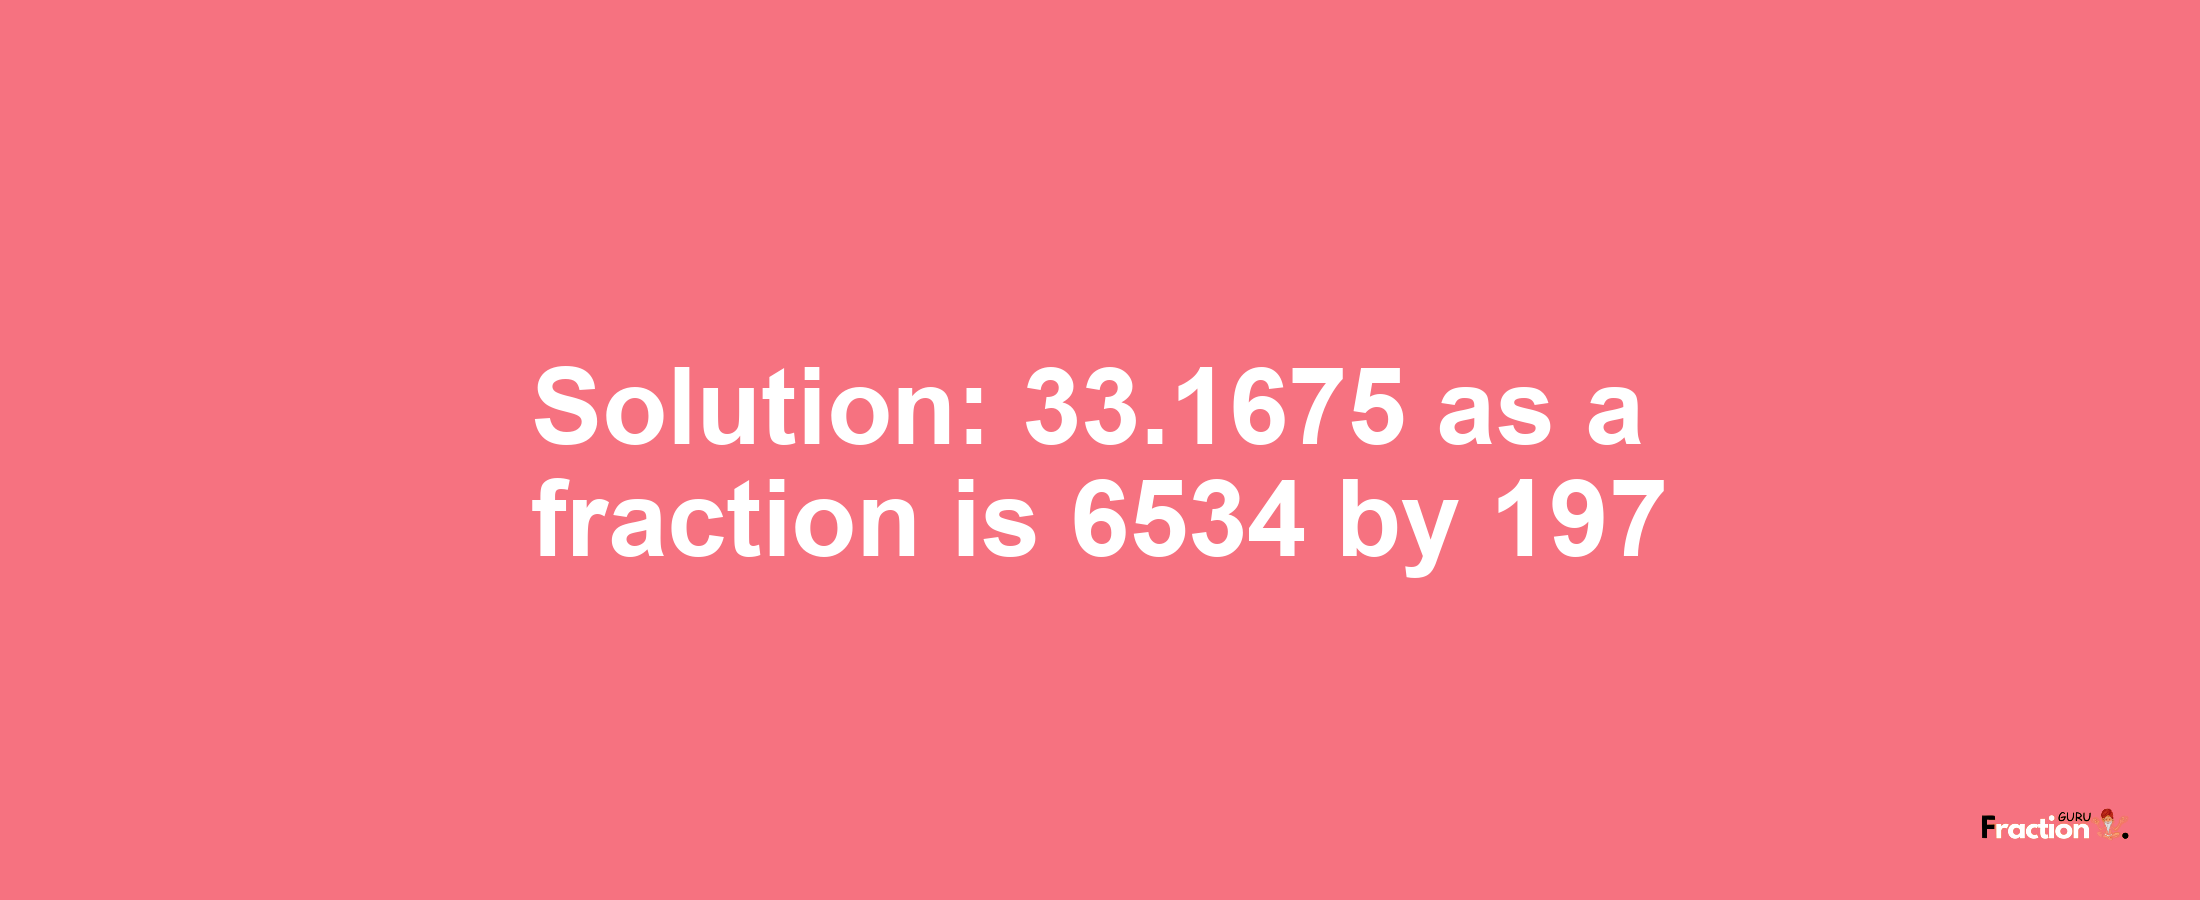 Solution:33.1675 as a fraction is 6534/197